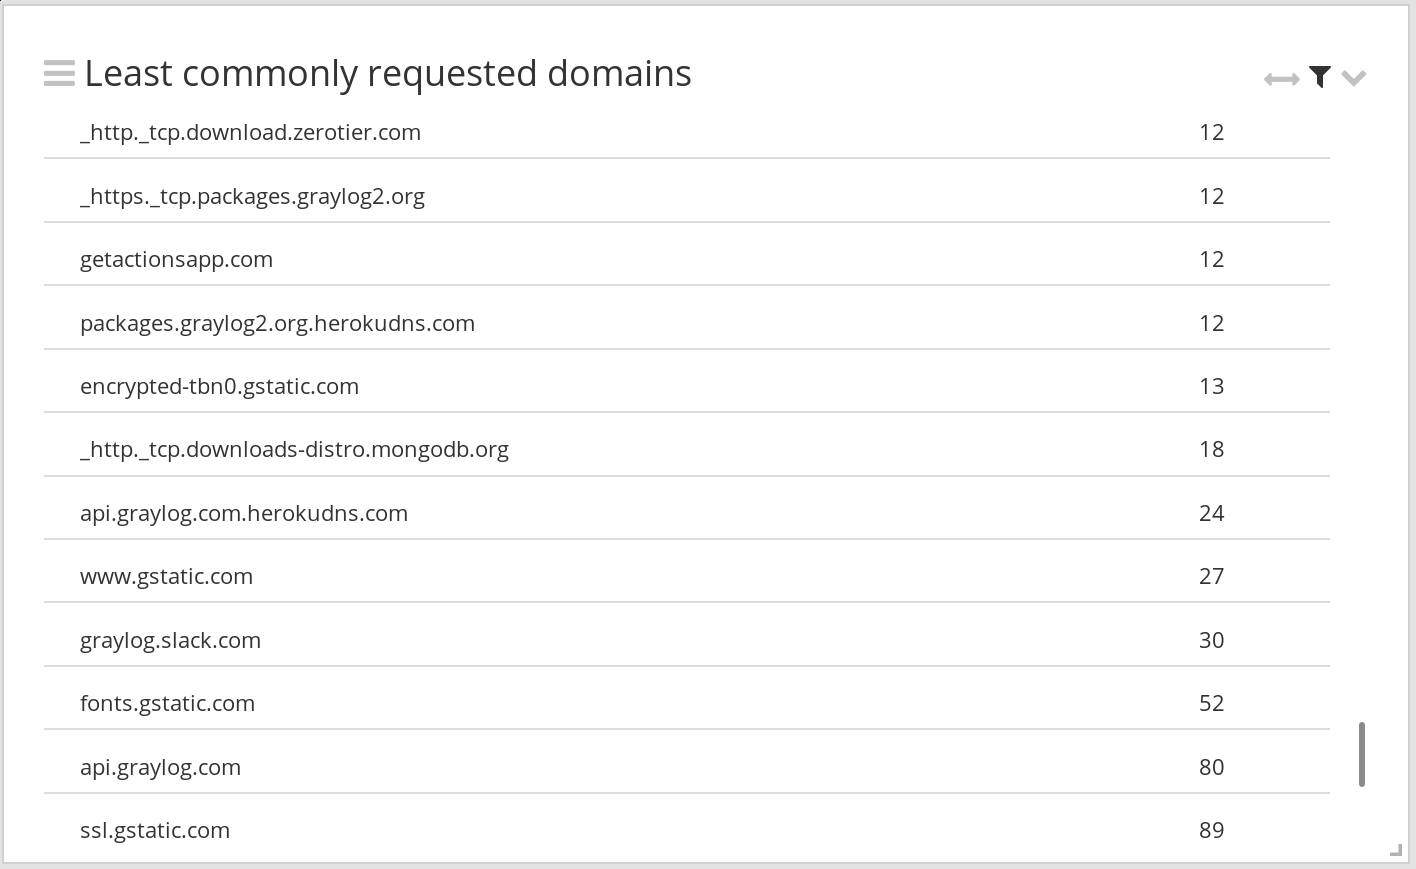 Widget: Least commonly requested domains